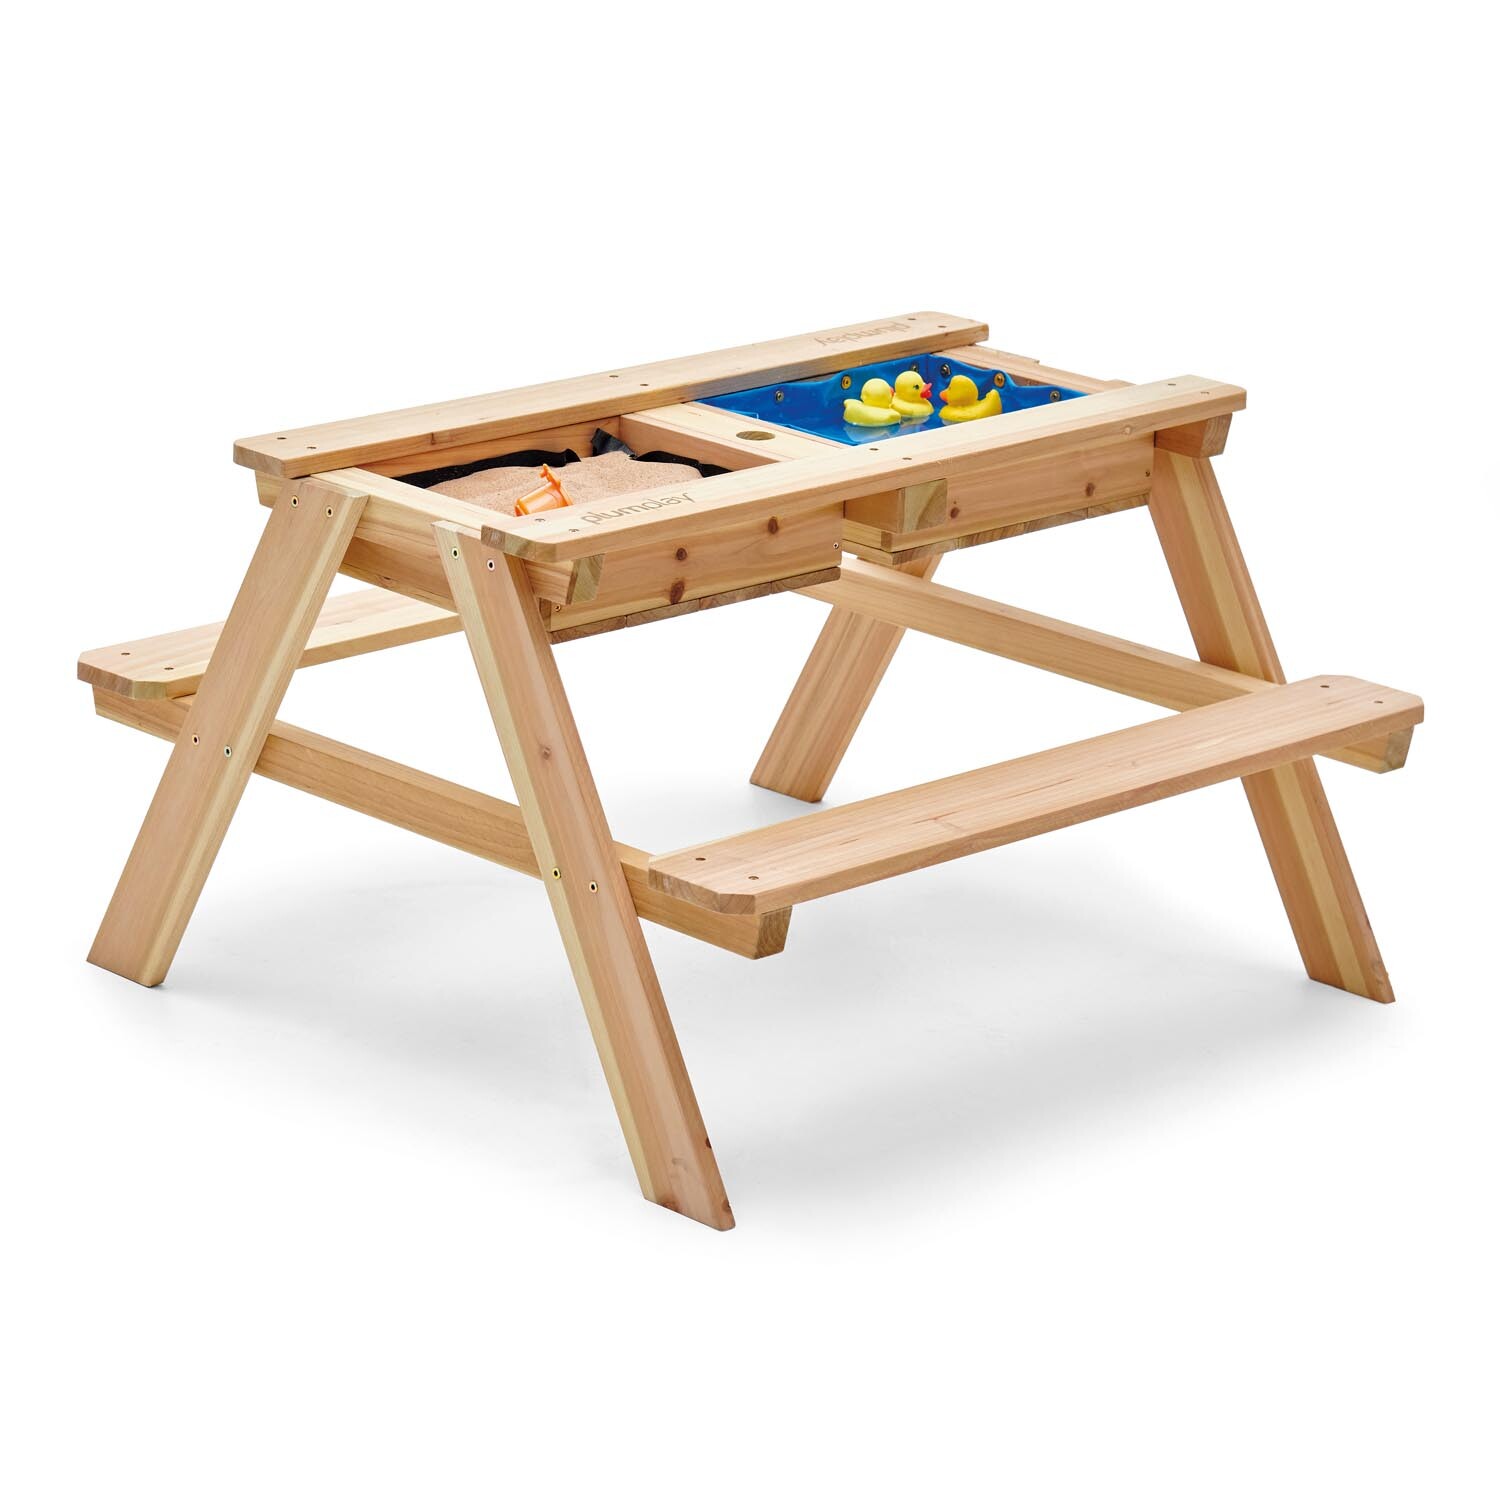 Wooden Sand & Water Picnic Table - Brown Image 1